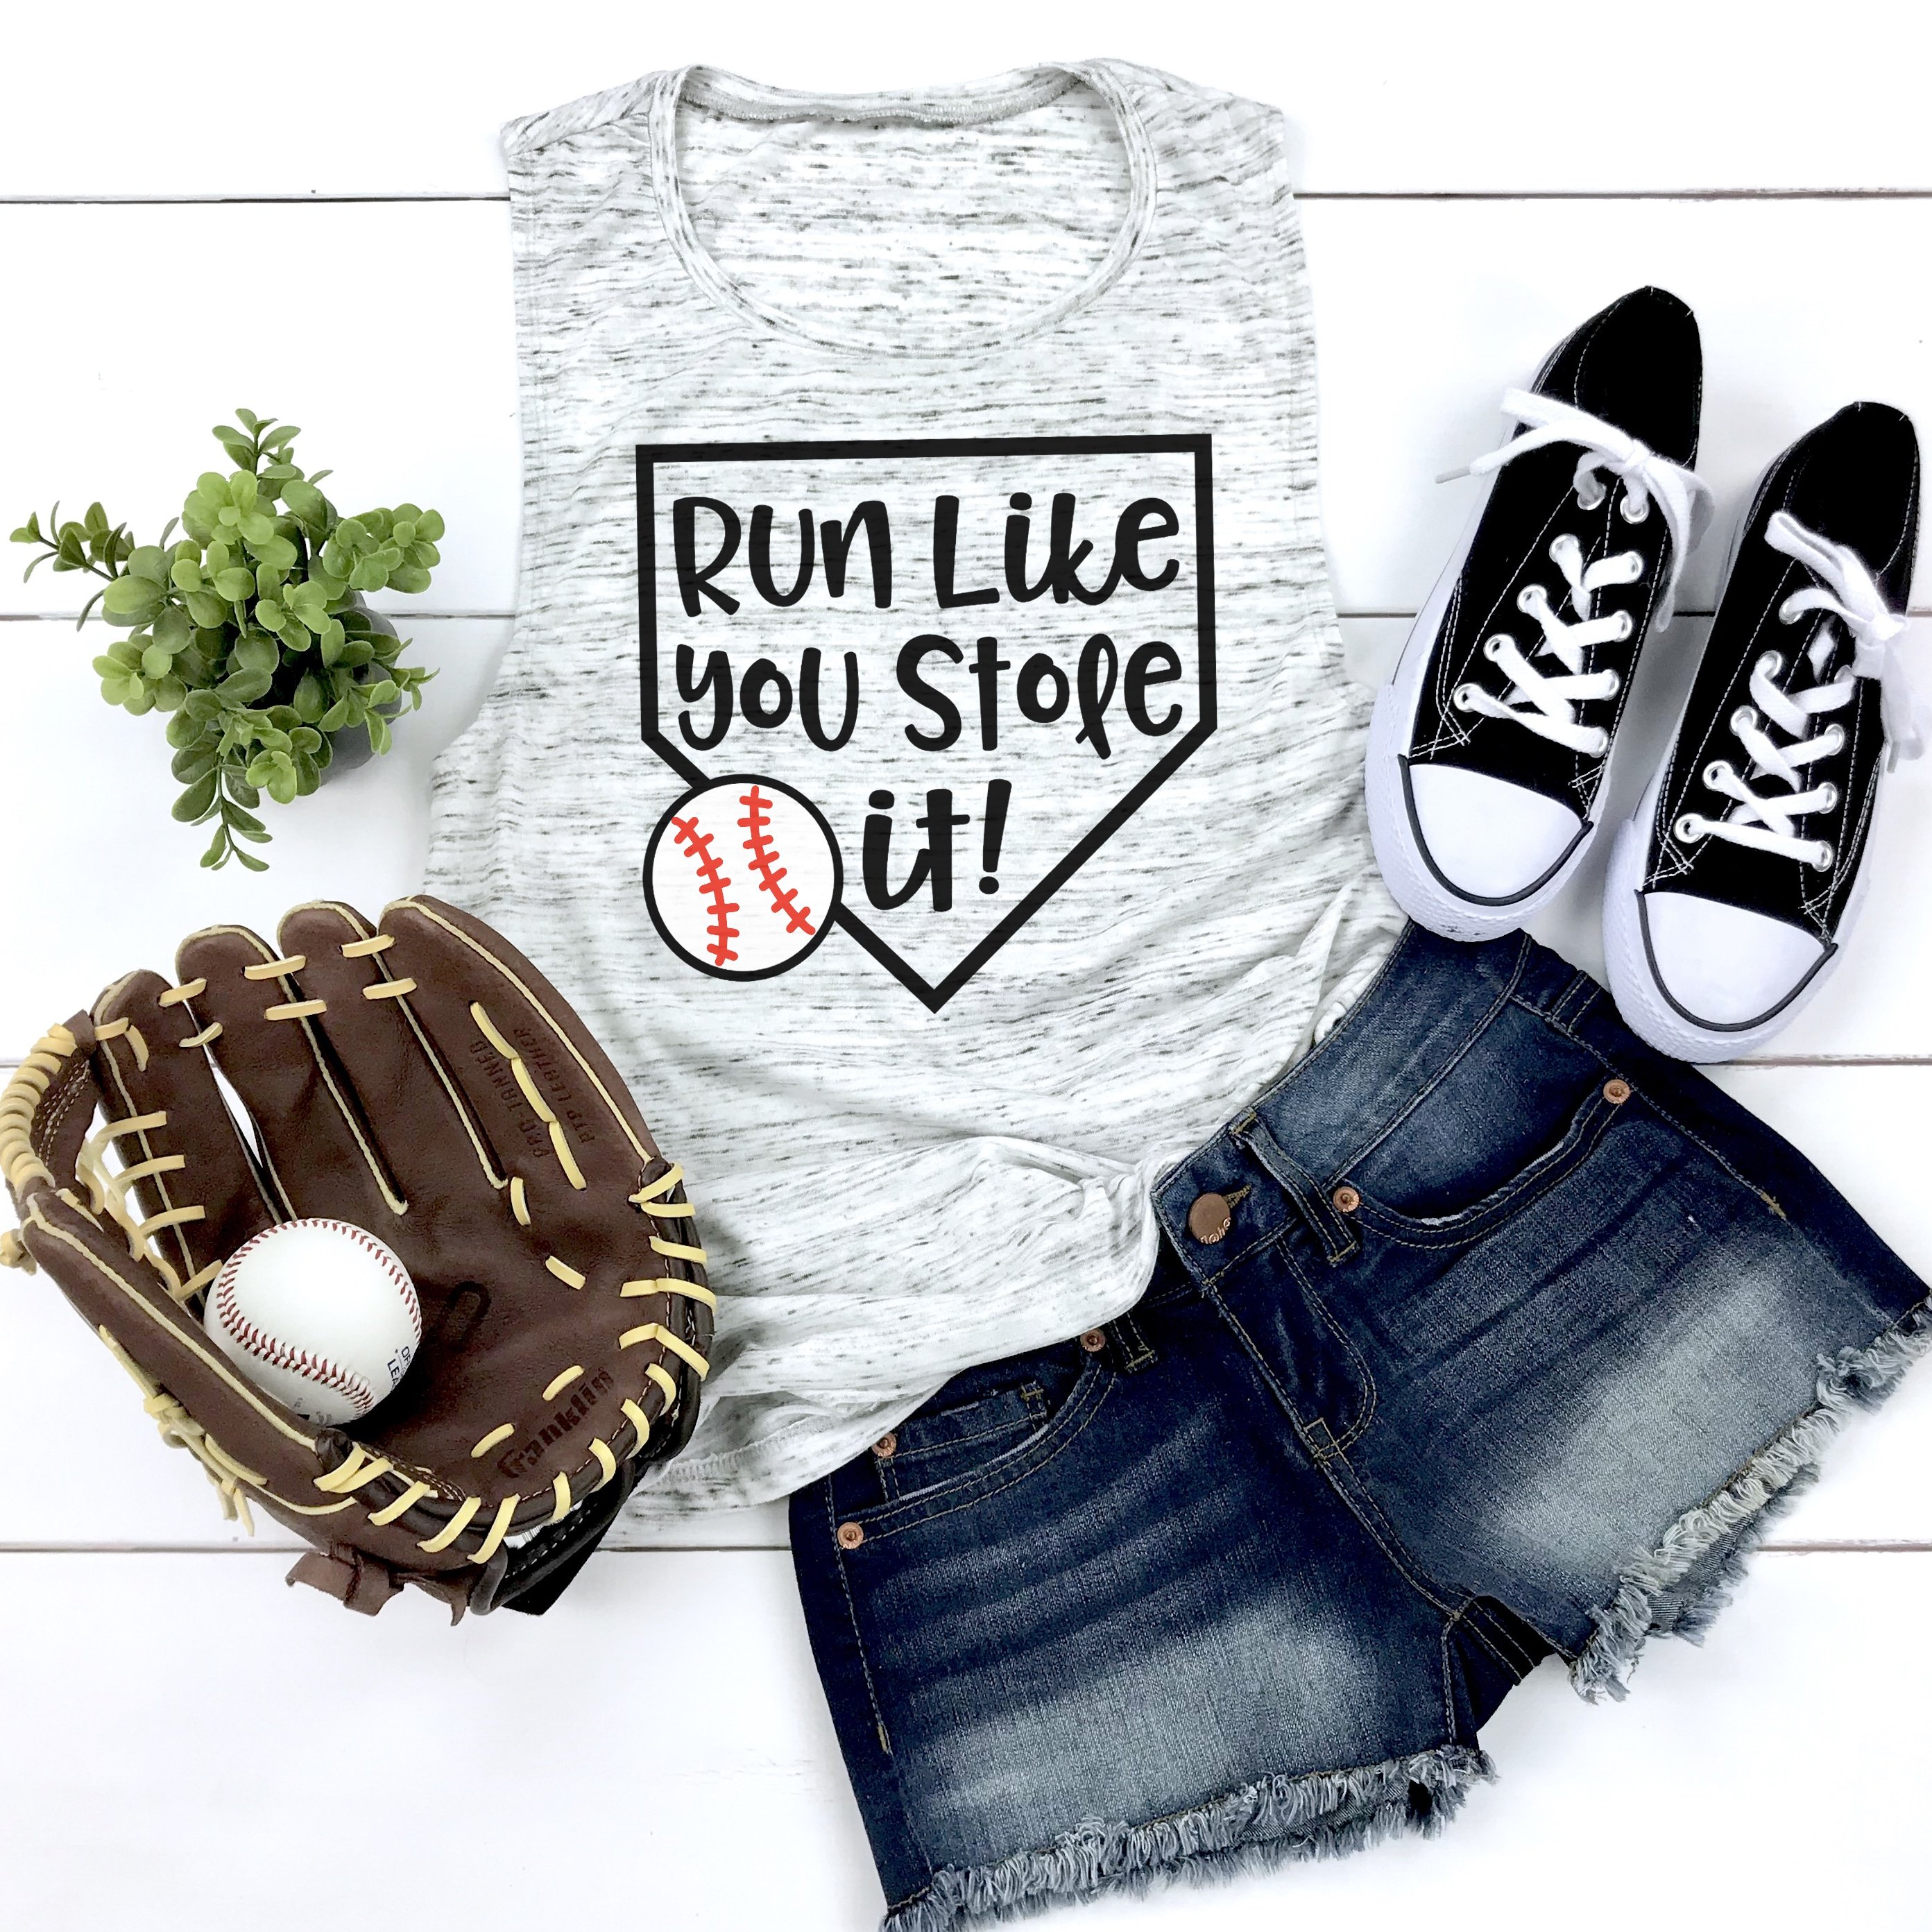 run like you stole it baseball svg file on shirt with accessories